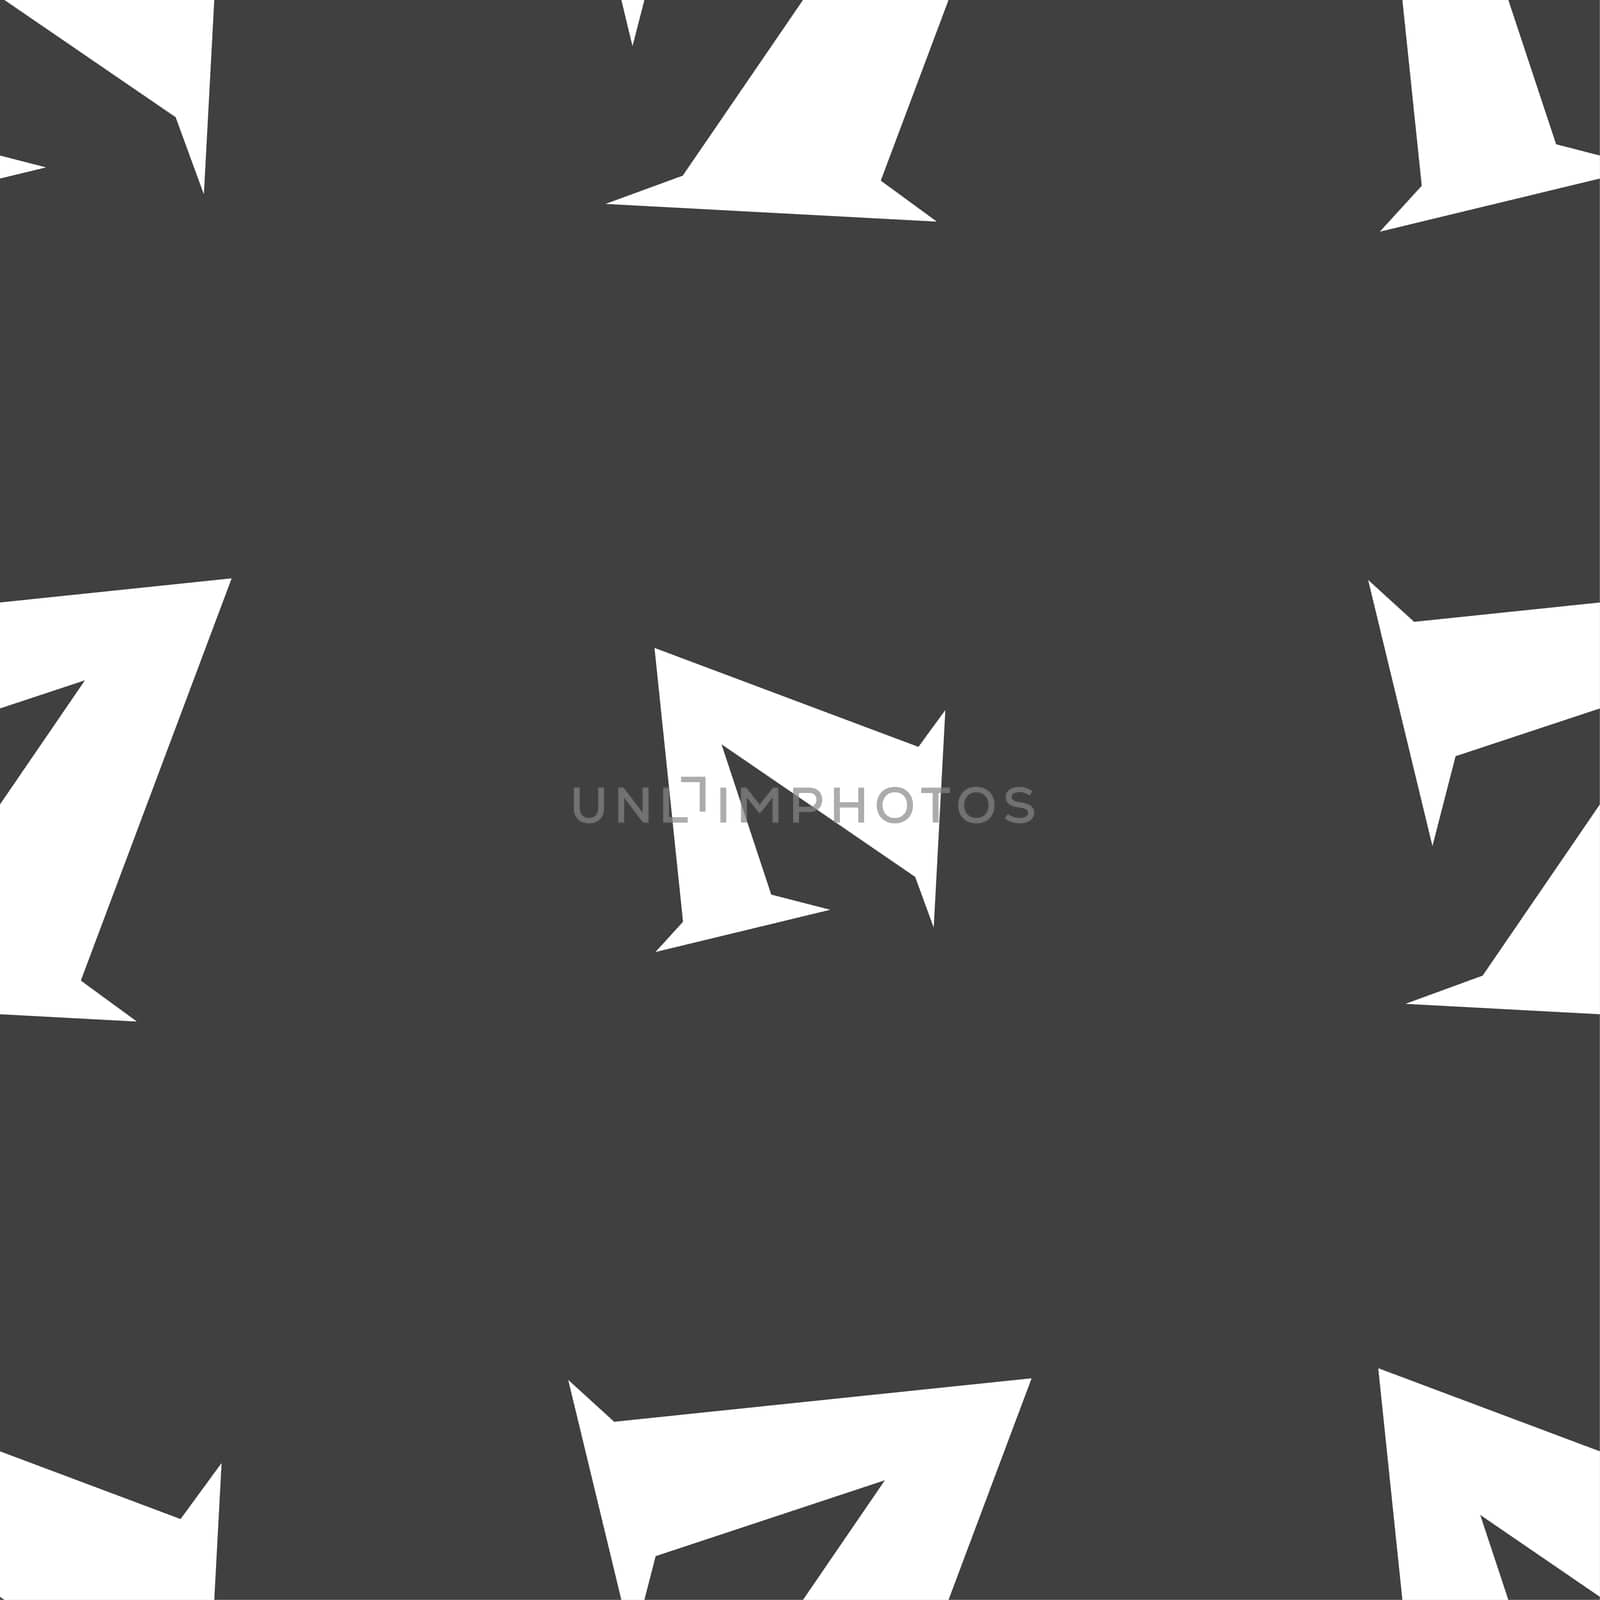 number seven icon sign. Seamless pattern on a gray background. illustration